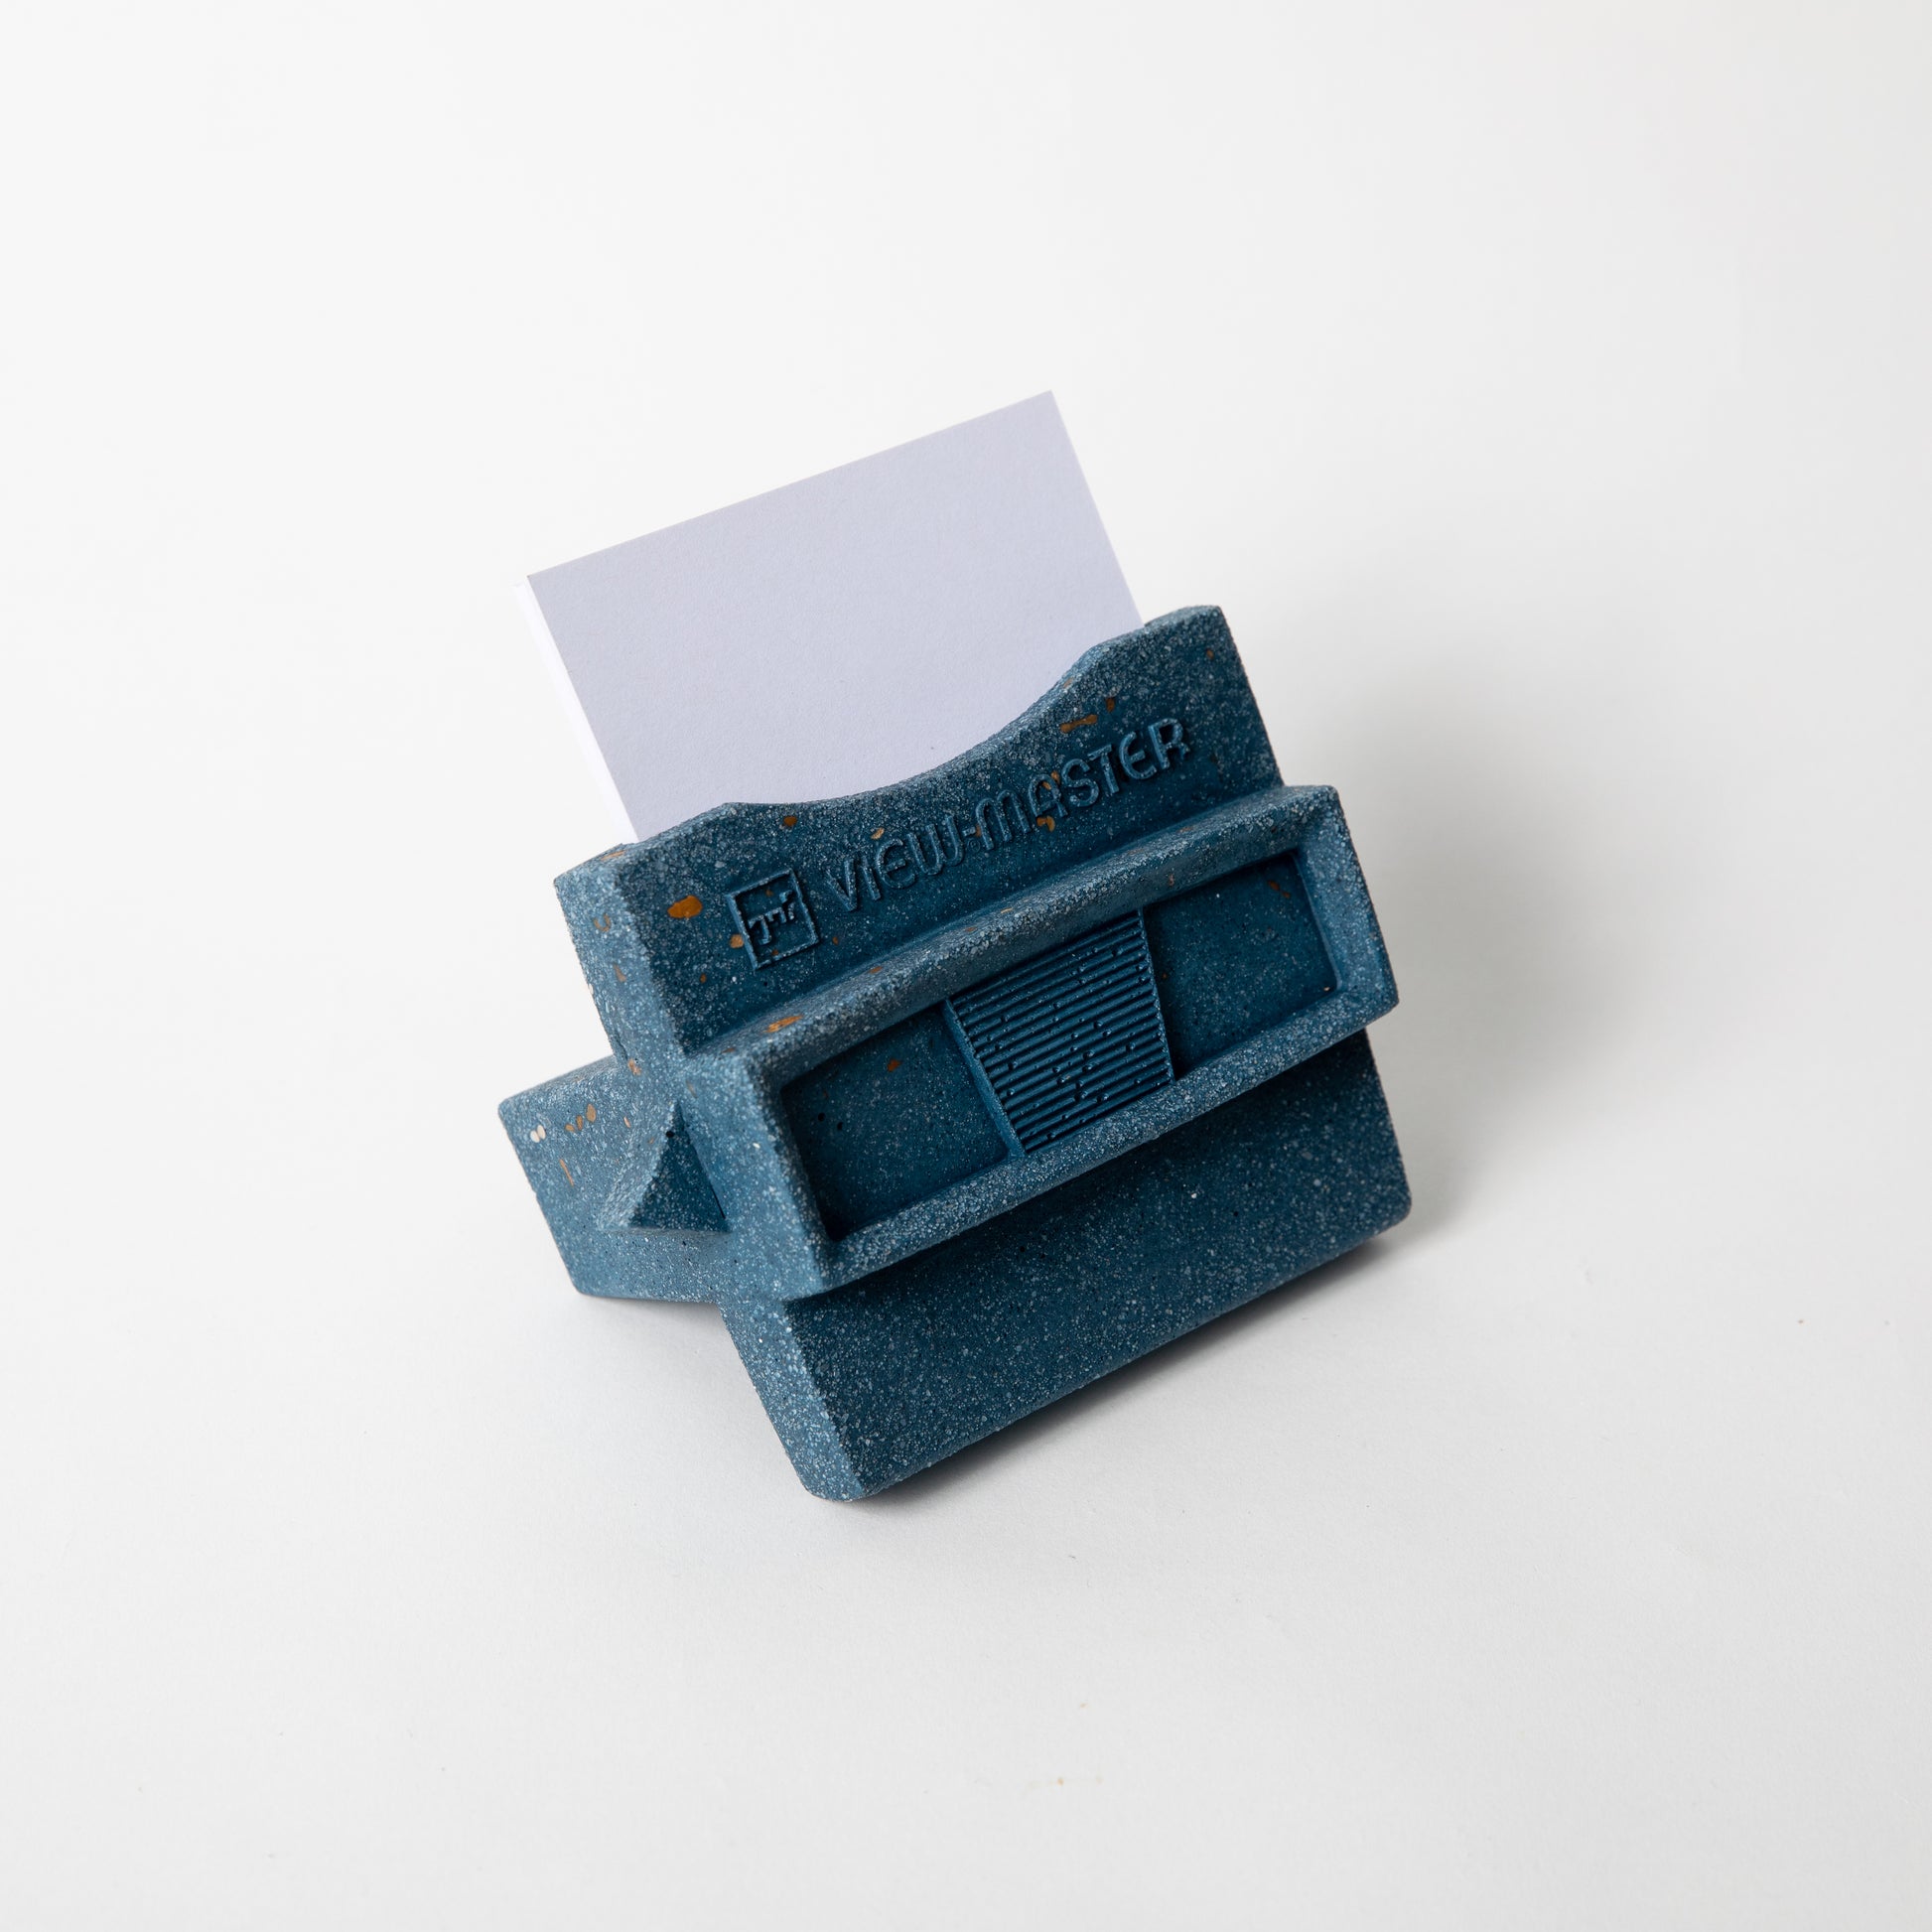 The Retro Business Card Holder in Cobalt Terrazzo w/ blank business cards placed inside.